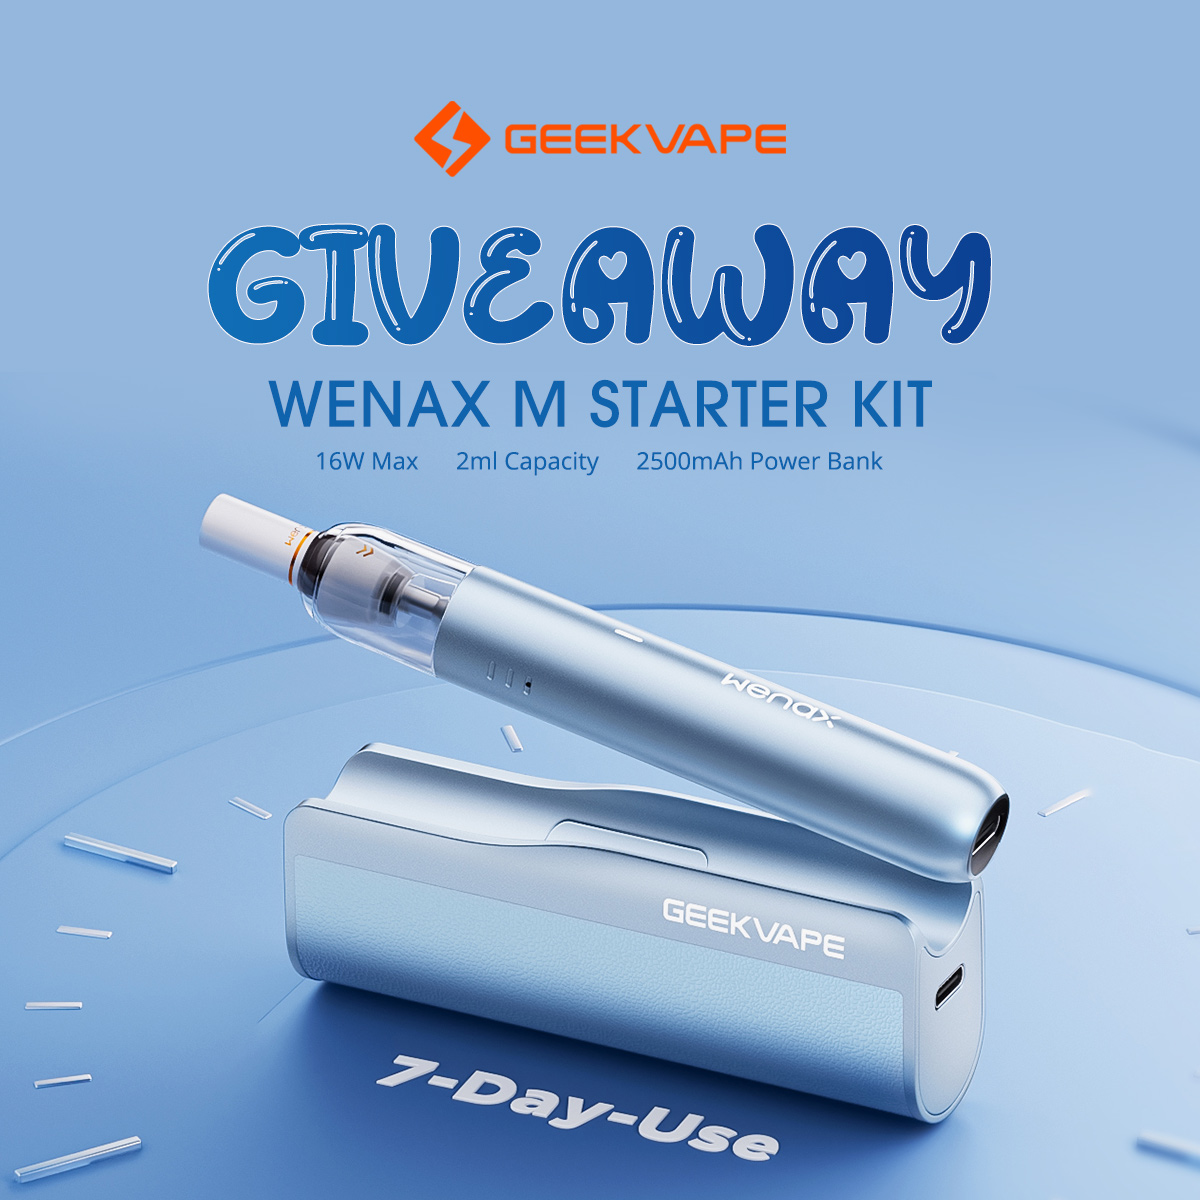 GIVEAWAY ALERT! 🔥

⚡GeekVape Wenax M Starter Kit ⚡

Terms & Conditions 👉sourcemore.com/geekvape-wenax…

Join in on the fun and you could be our lucky WINNER! 🏆

⚠ Warning: The device is used with e-liquid which contains addictive chemical nicotine. For Adult use only.